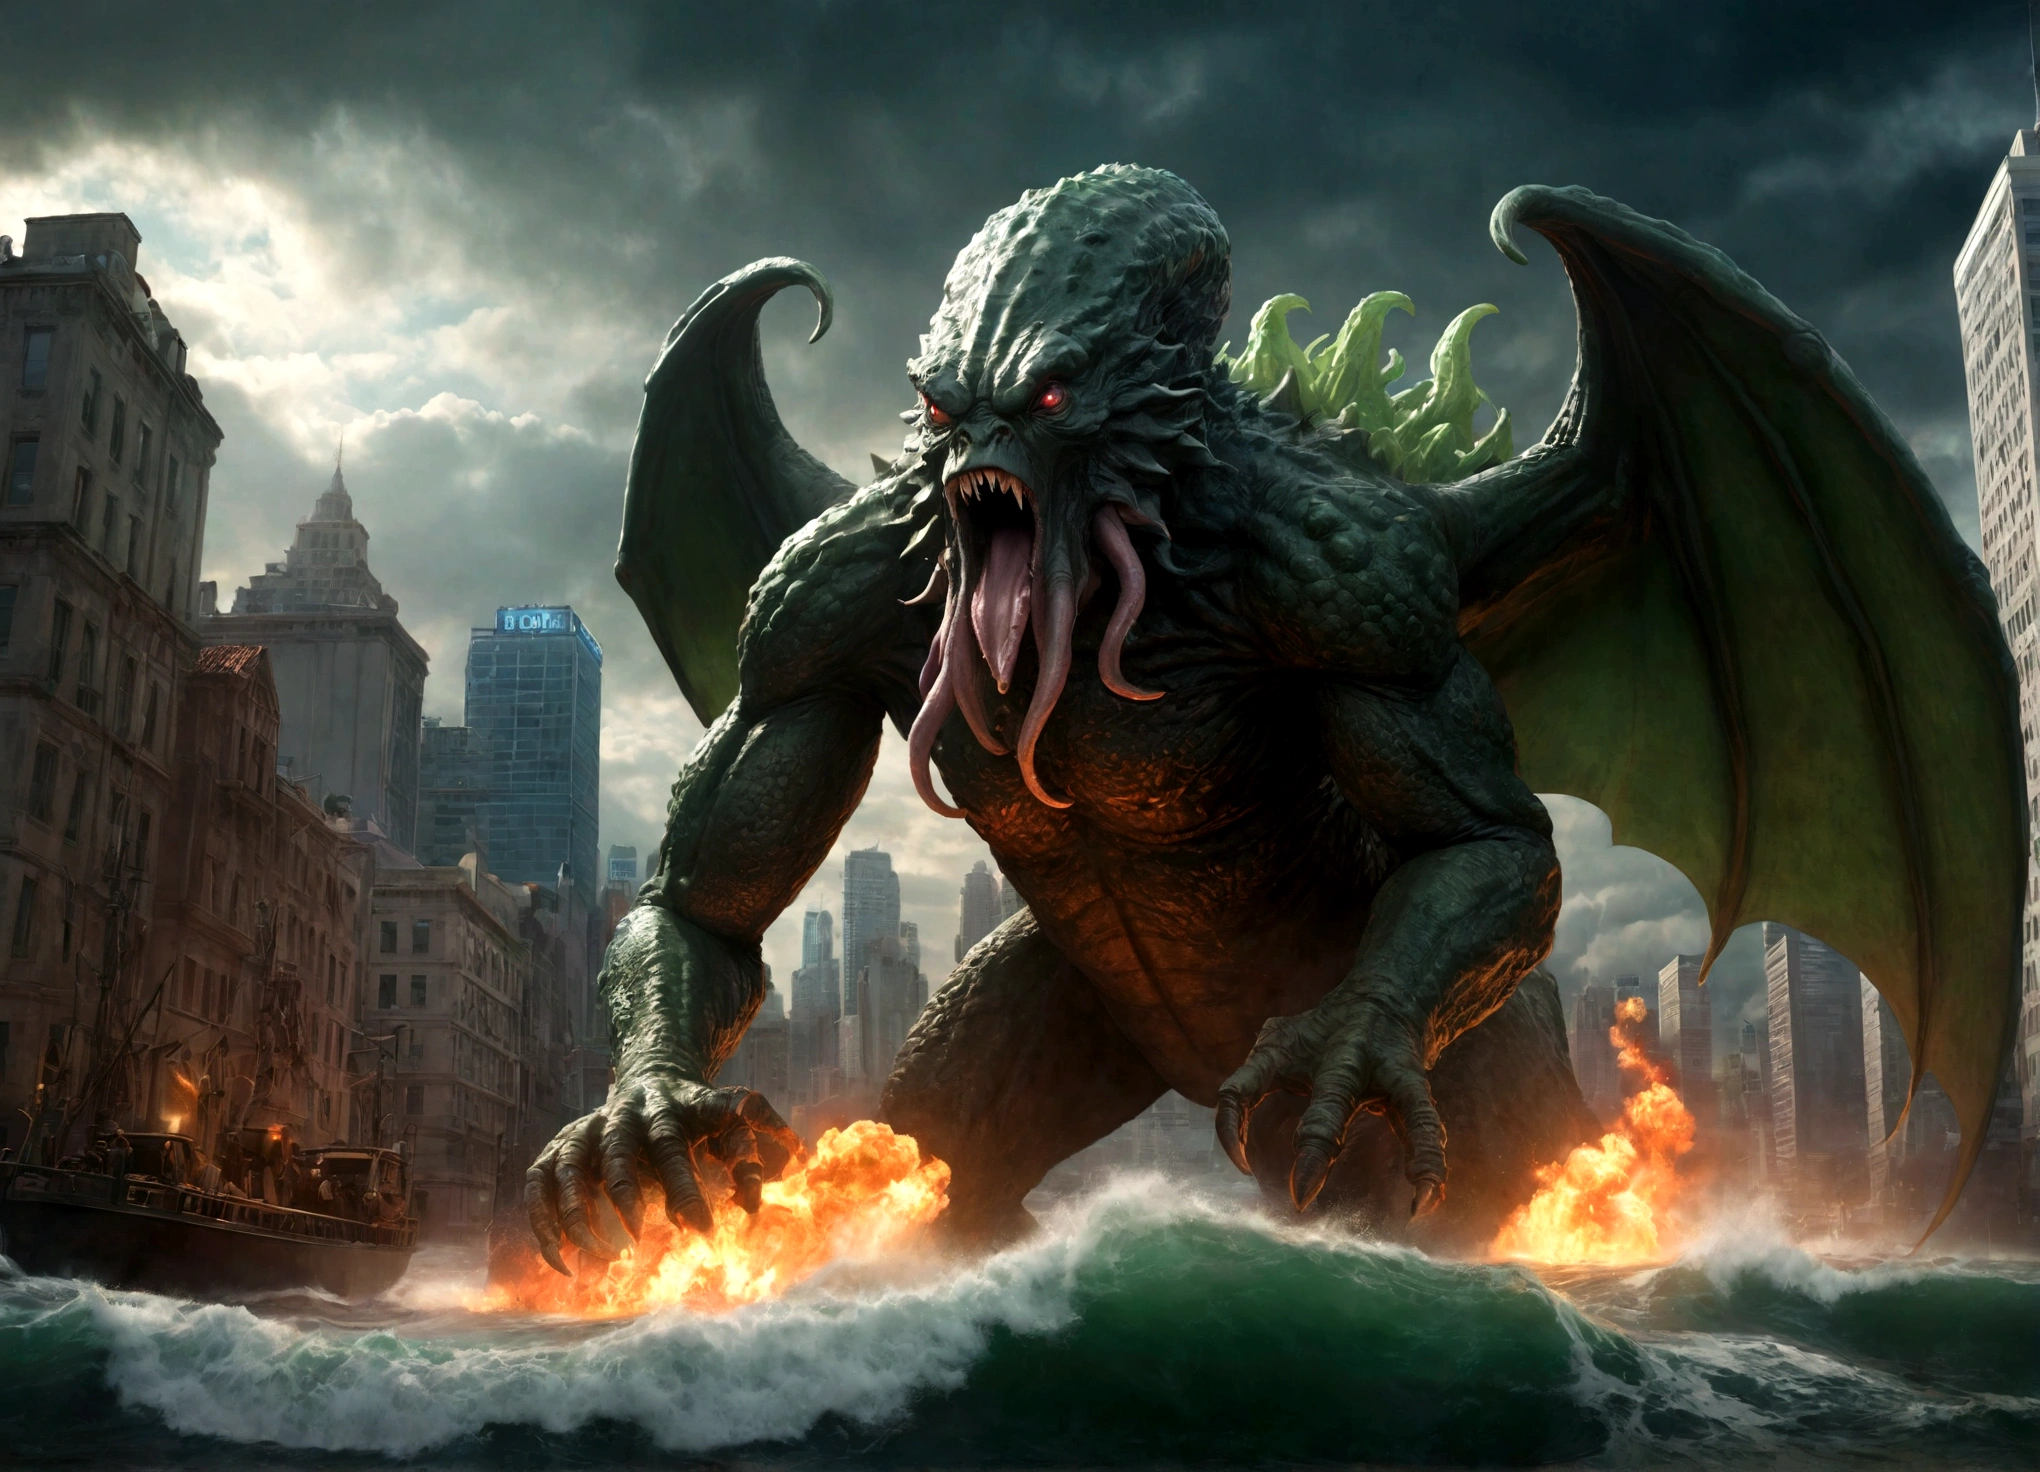 Cthulu is approaching Bangkok, from the other side of the city Godzilla roars and shoots nuclear fire